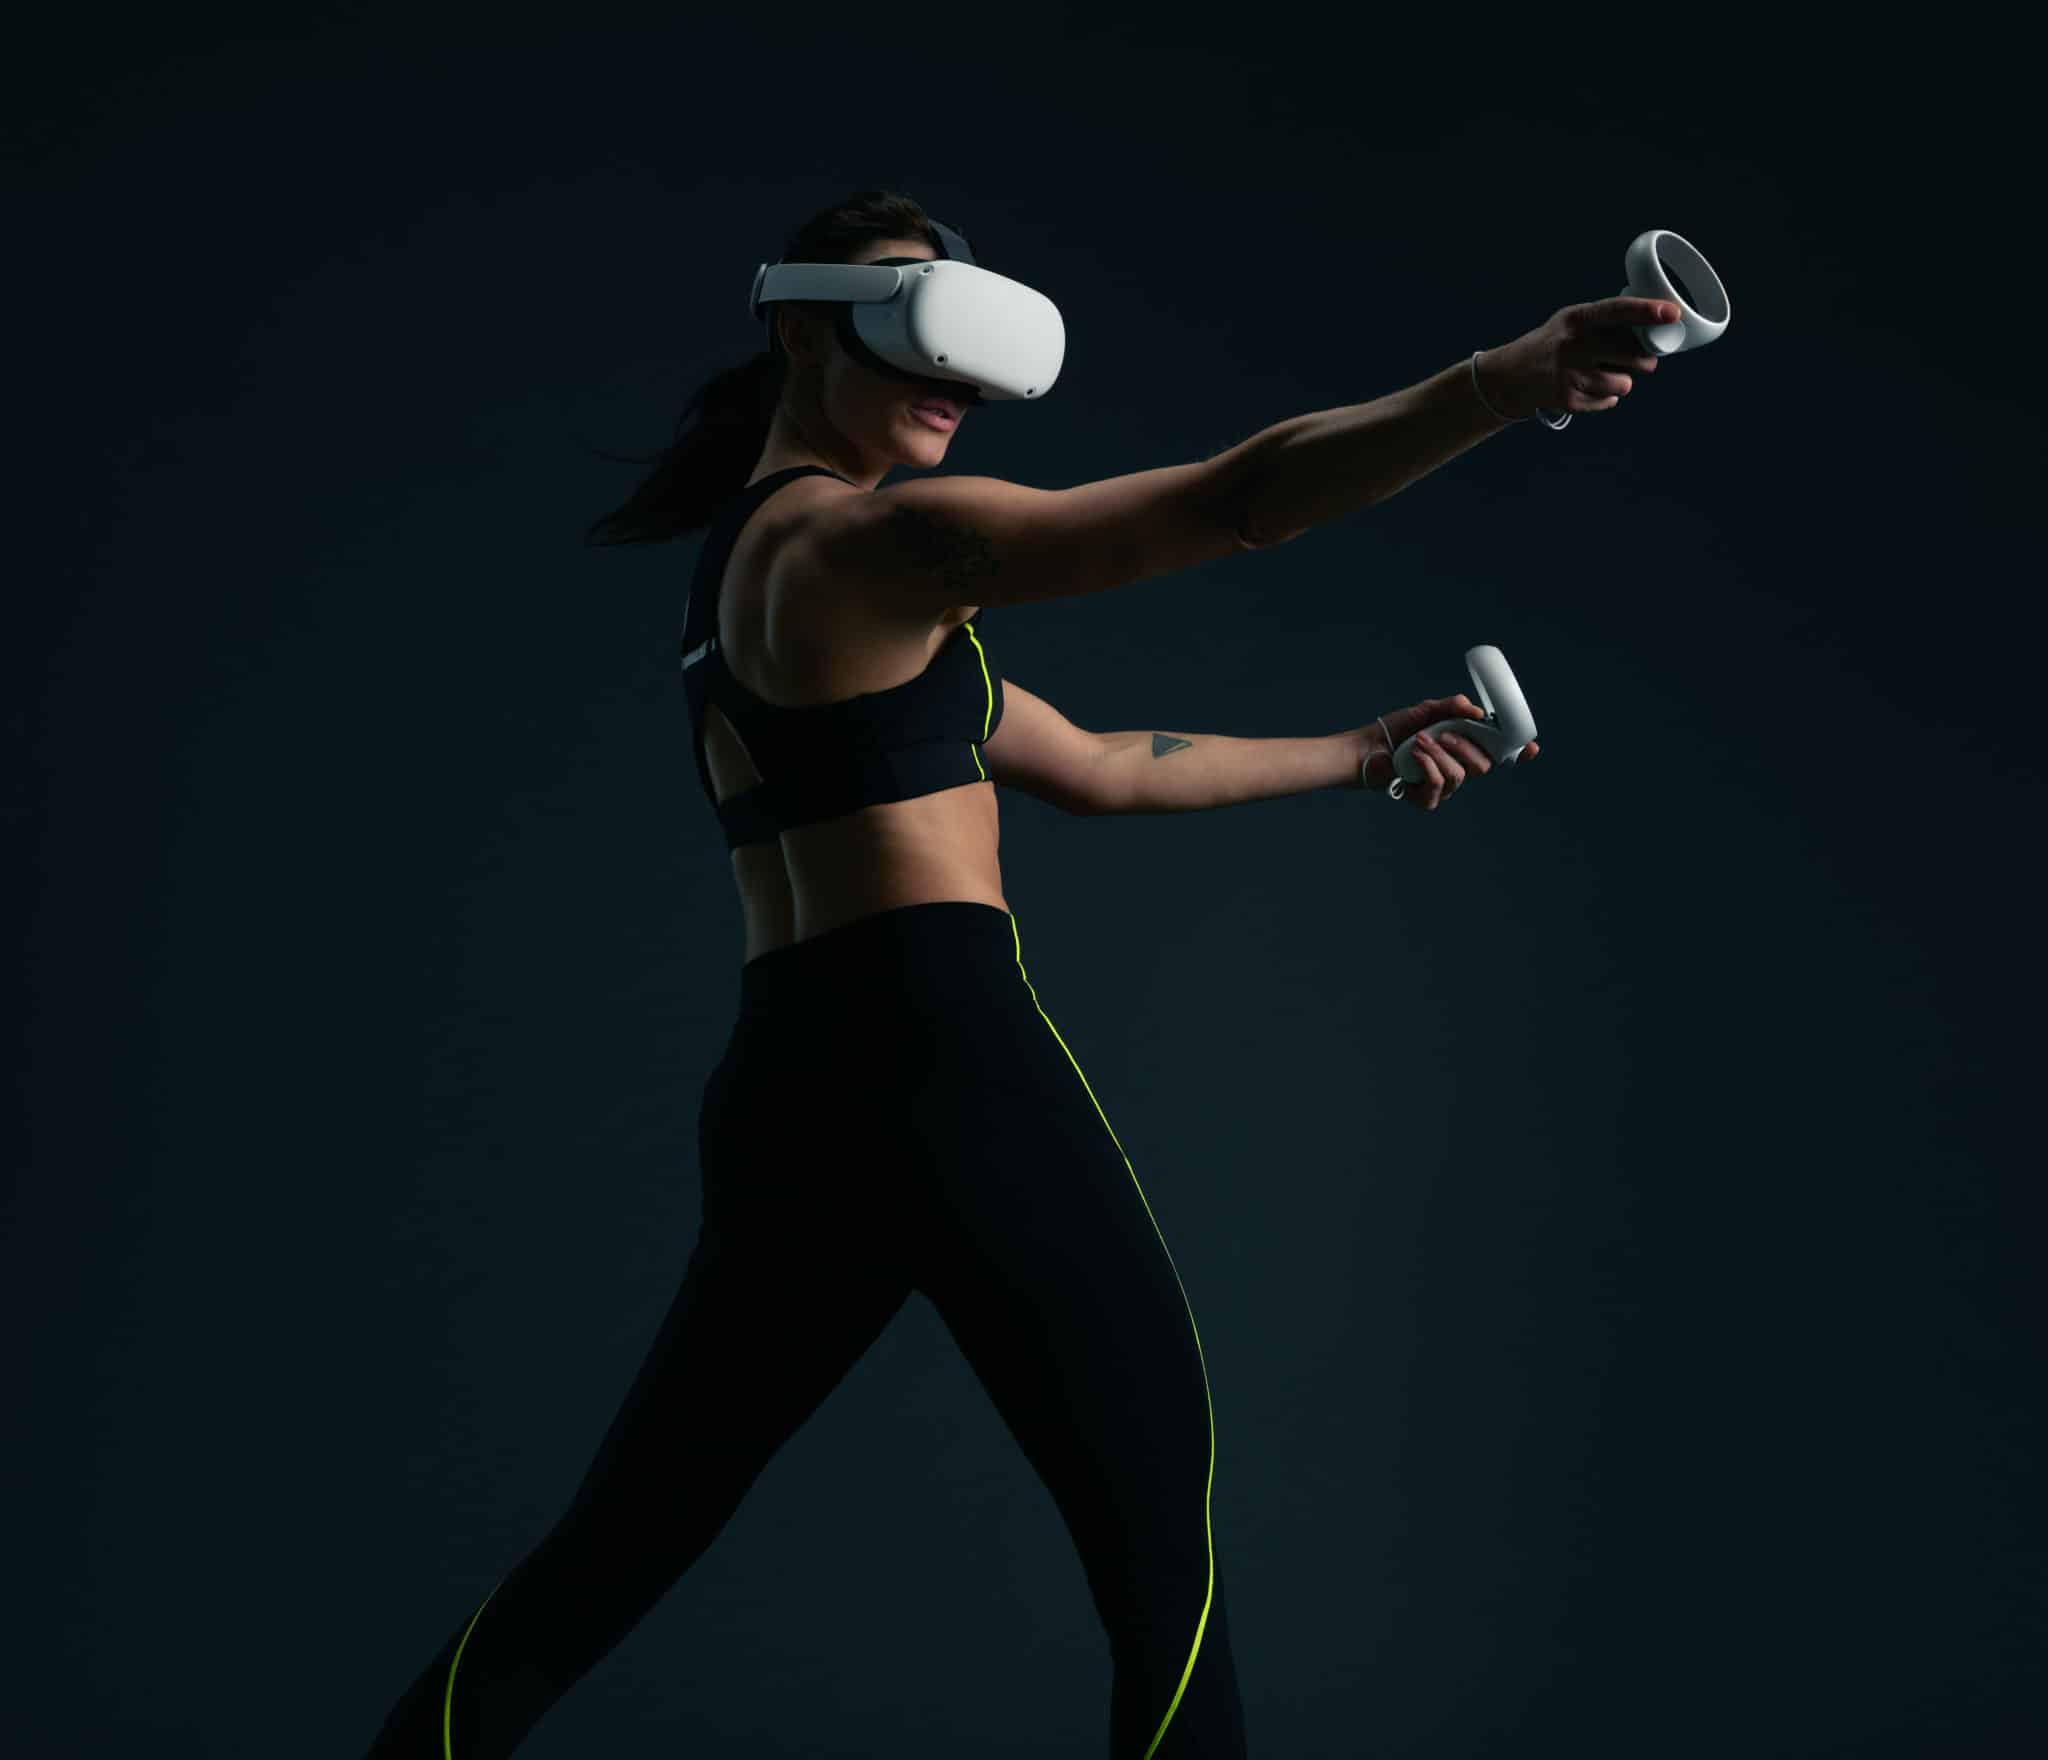 Girl doing her VR workout using VR headset